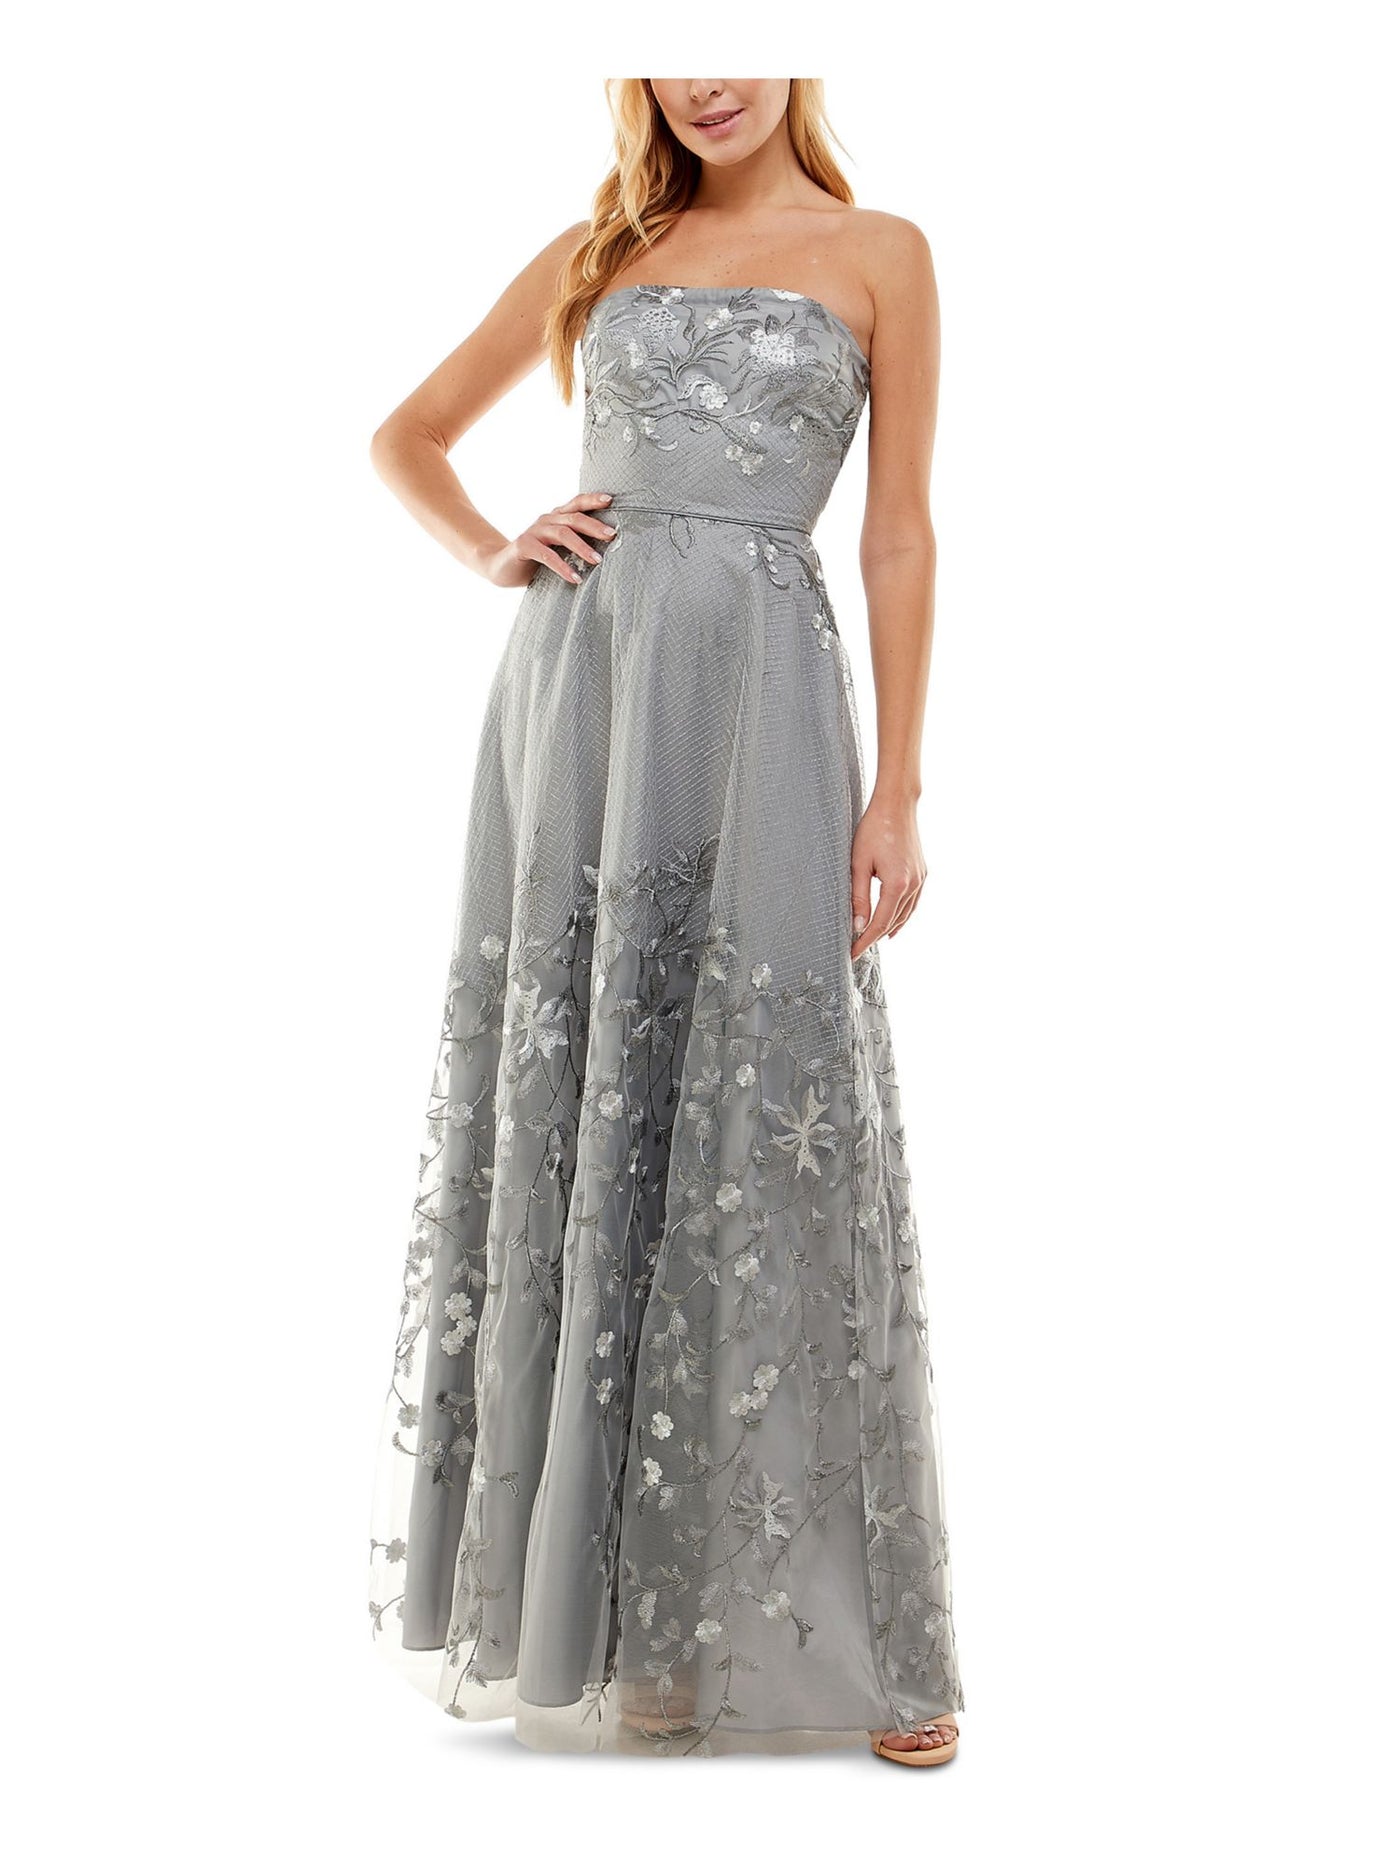 CITY STUDIO Womens Gray Embroidered Lace Zippered Sleeveless Strapless Full-Length  Gown Prom Dress Juniors 1